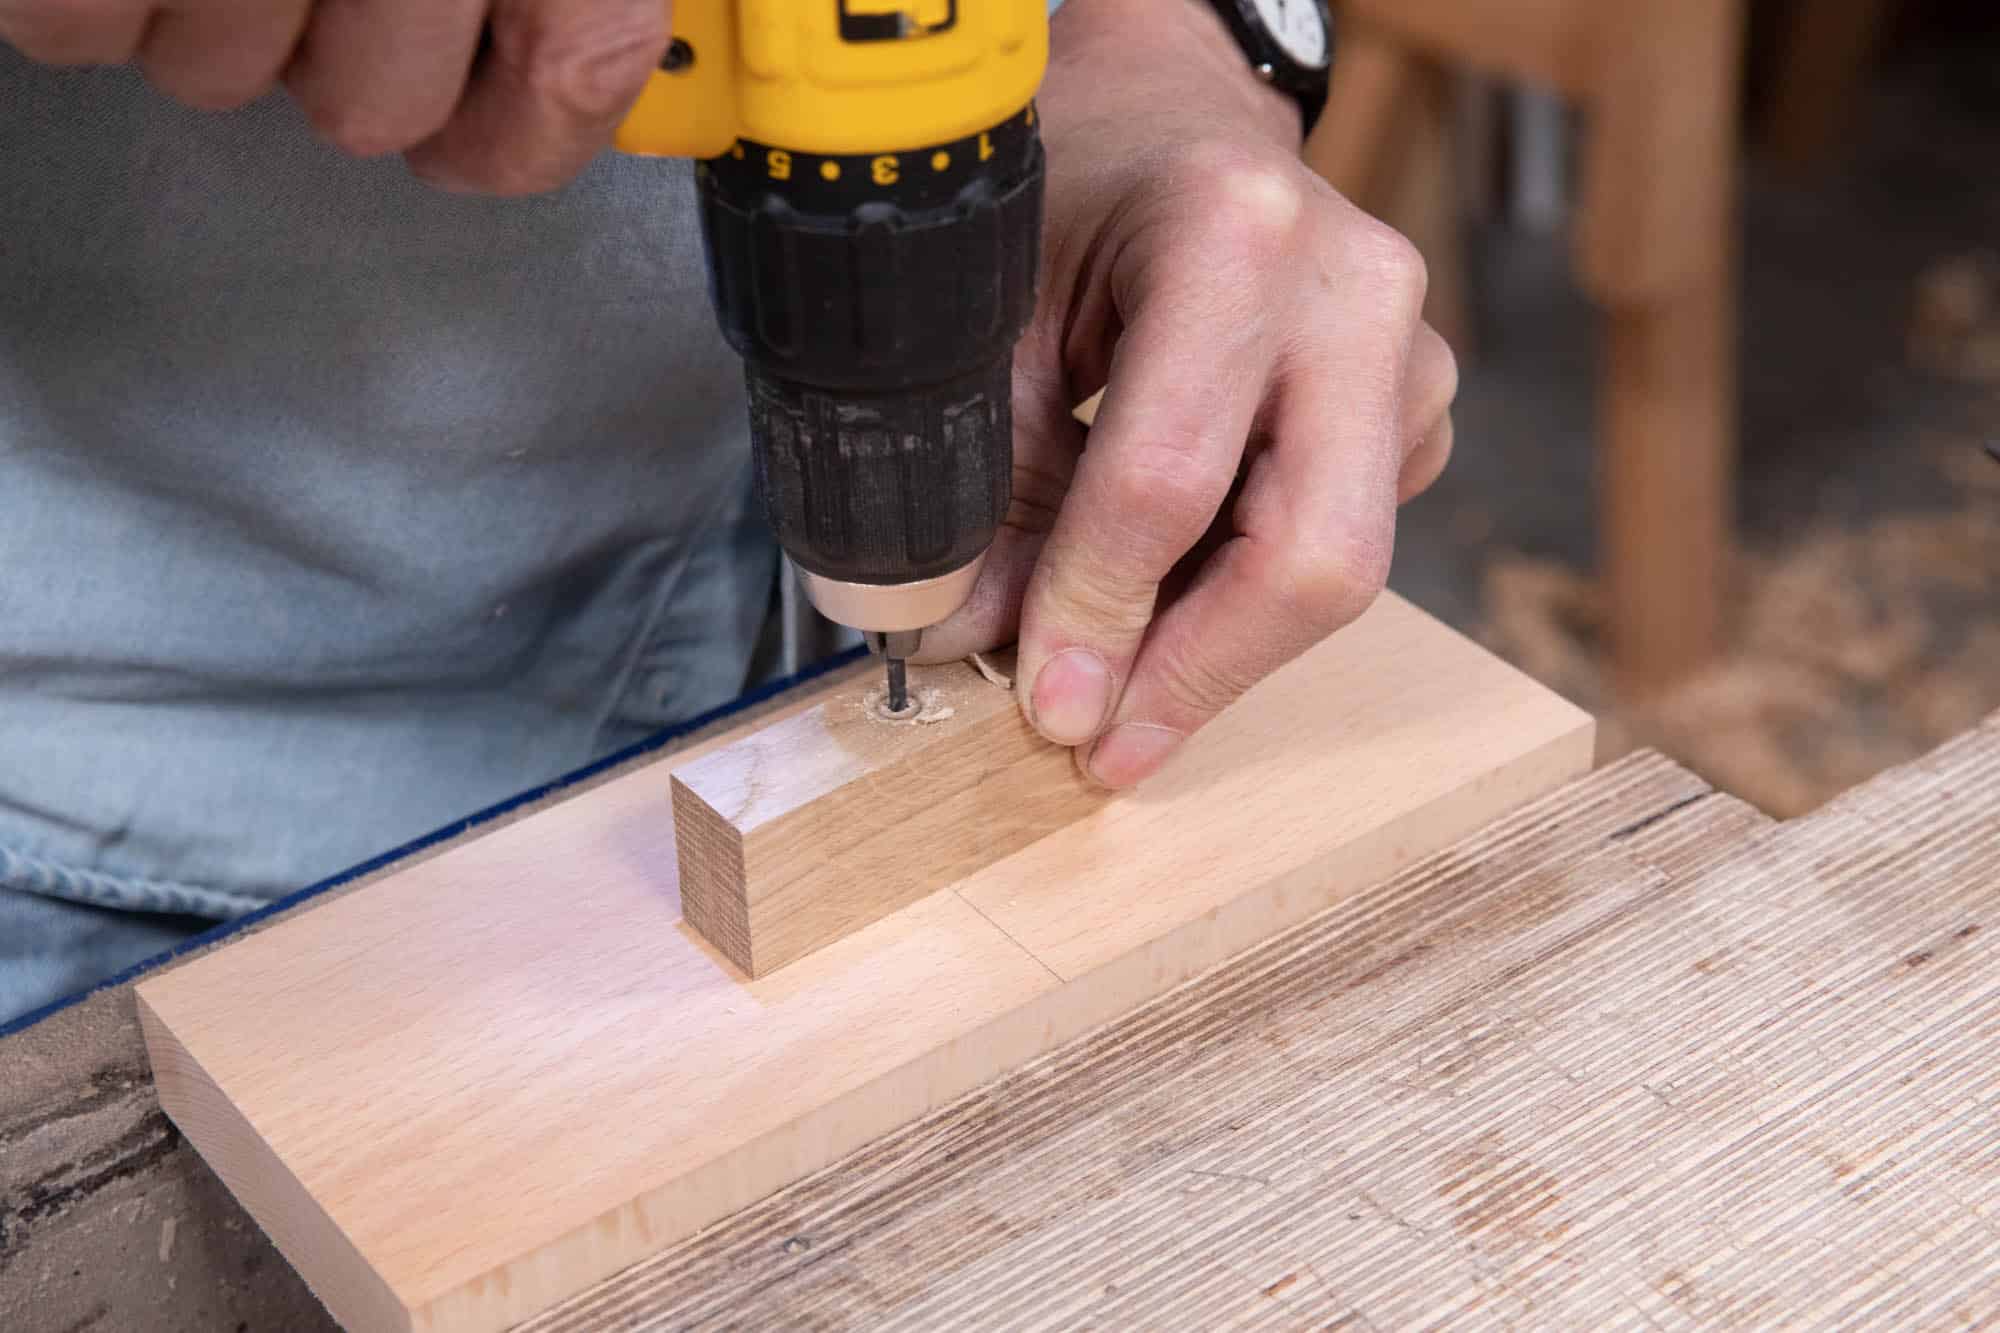 Small Drill Bit Challenges 